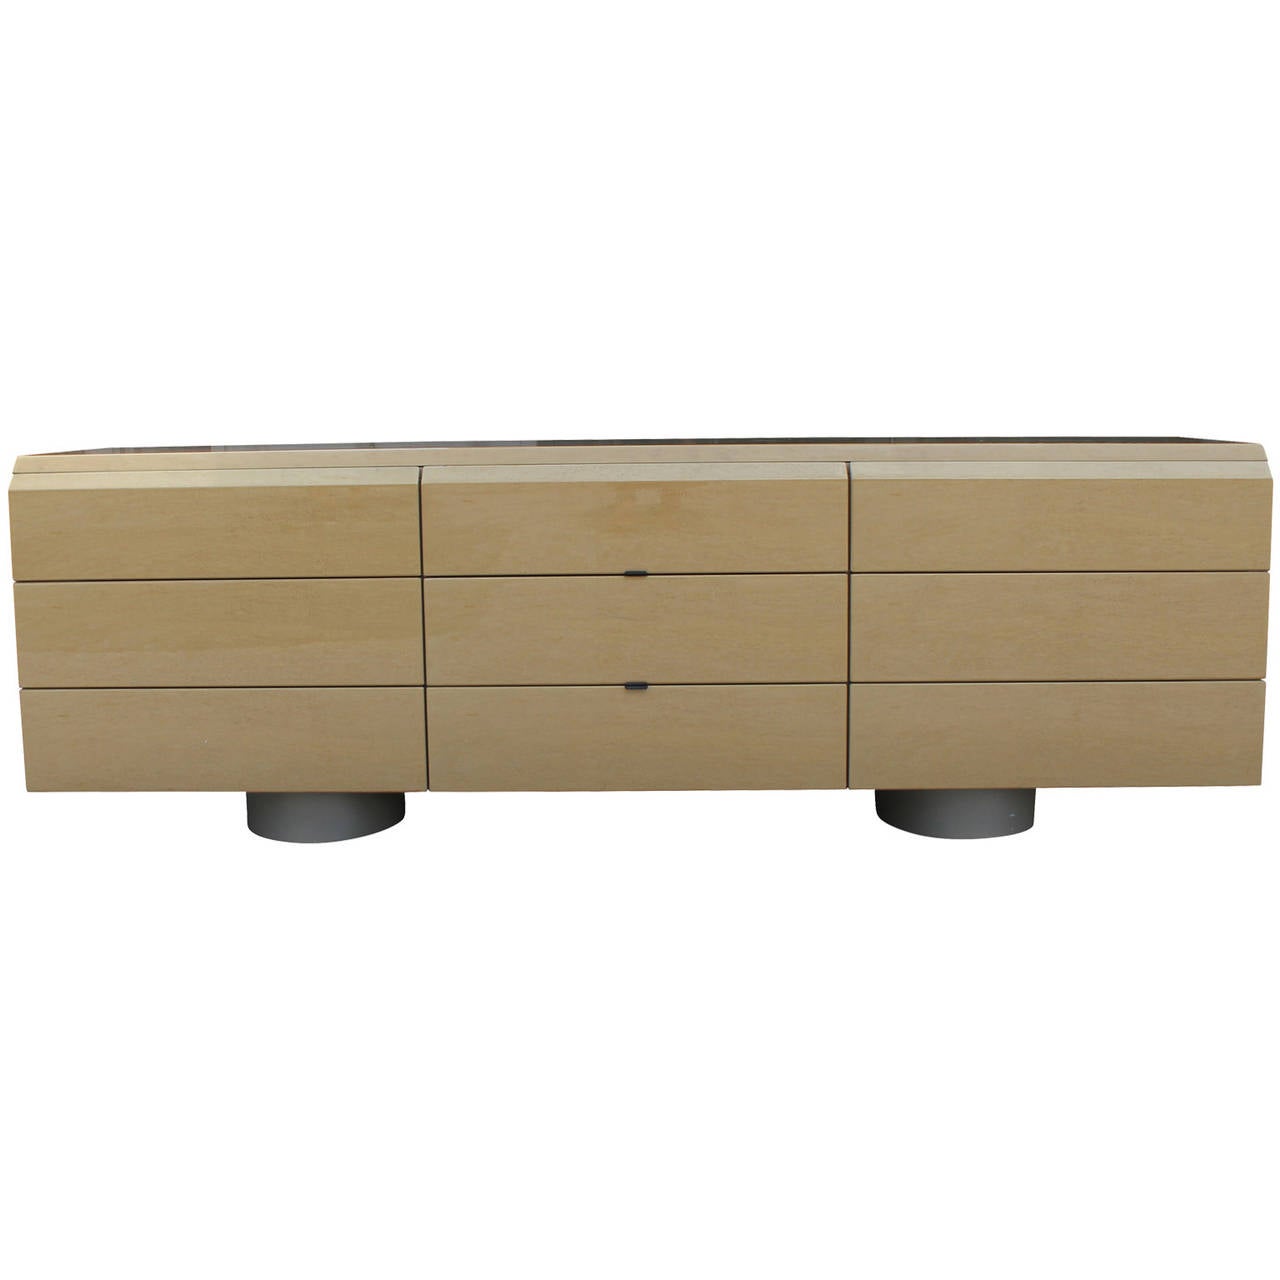 Wonderful 9 drawer dresser by Saporit Italia. Dresser is in a high gloss birds eye maple. Nine deep drawers provide ample storage. Two center drawers have metal tab pulls. Two cylindrical bases give this piece a floating look. Retains original